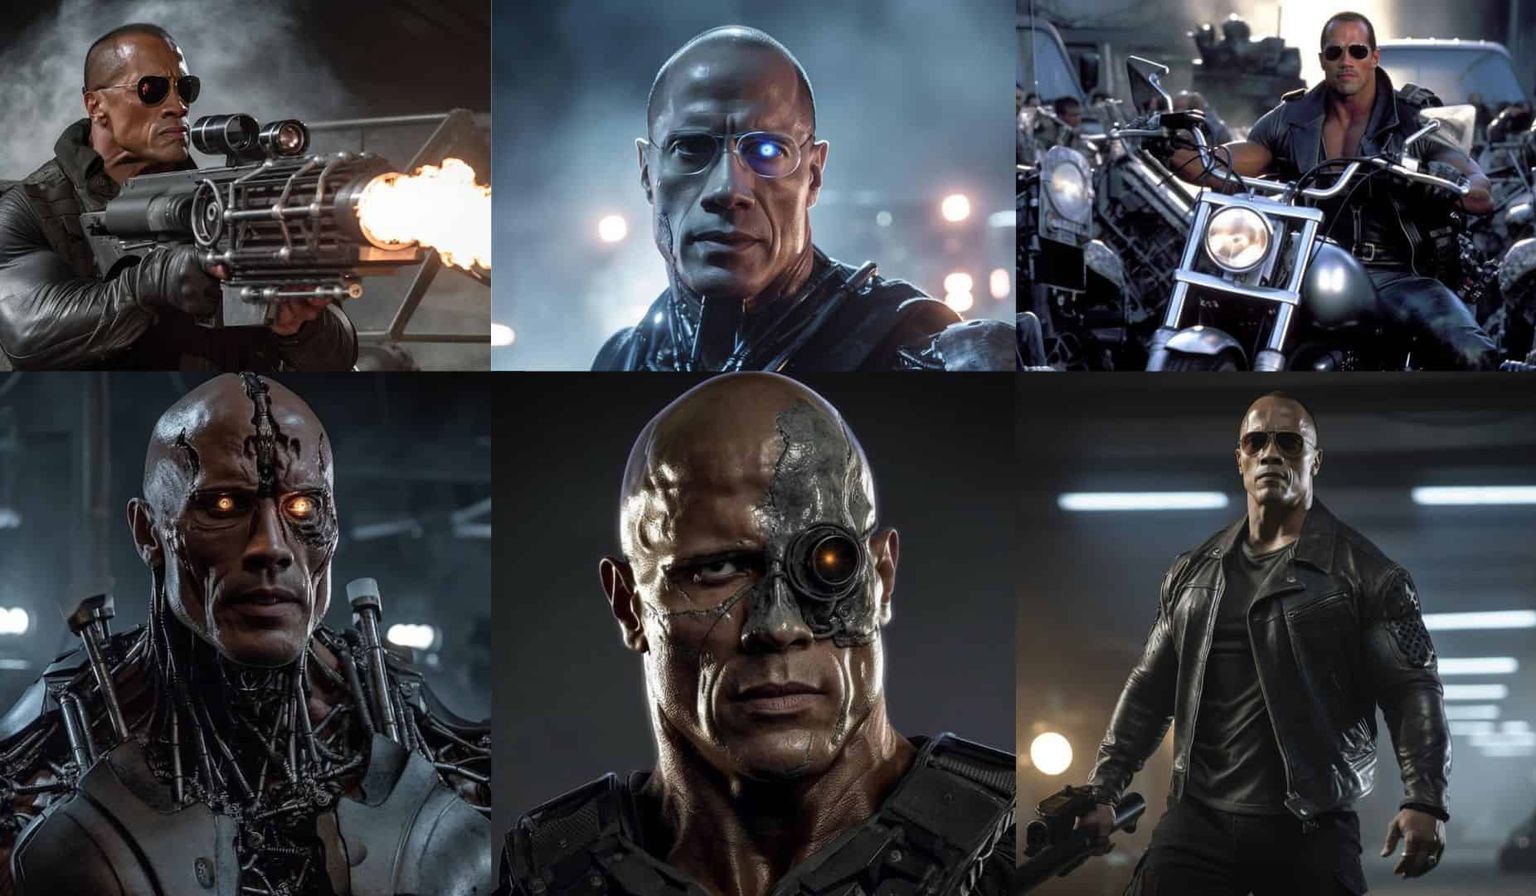 Is The Rock Set to Replace Arnold Schwarzenegger in the Terminator Series? Stunning AI Art Drops Hints